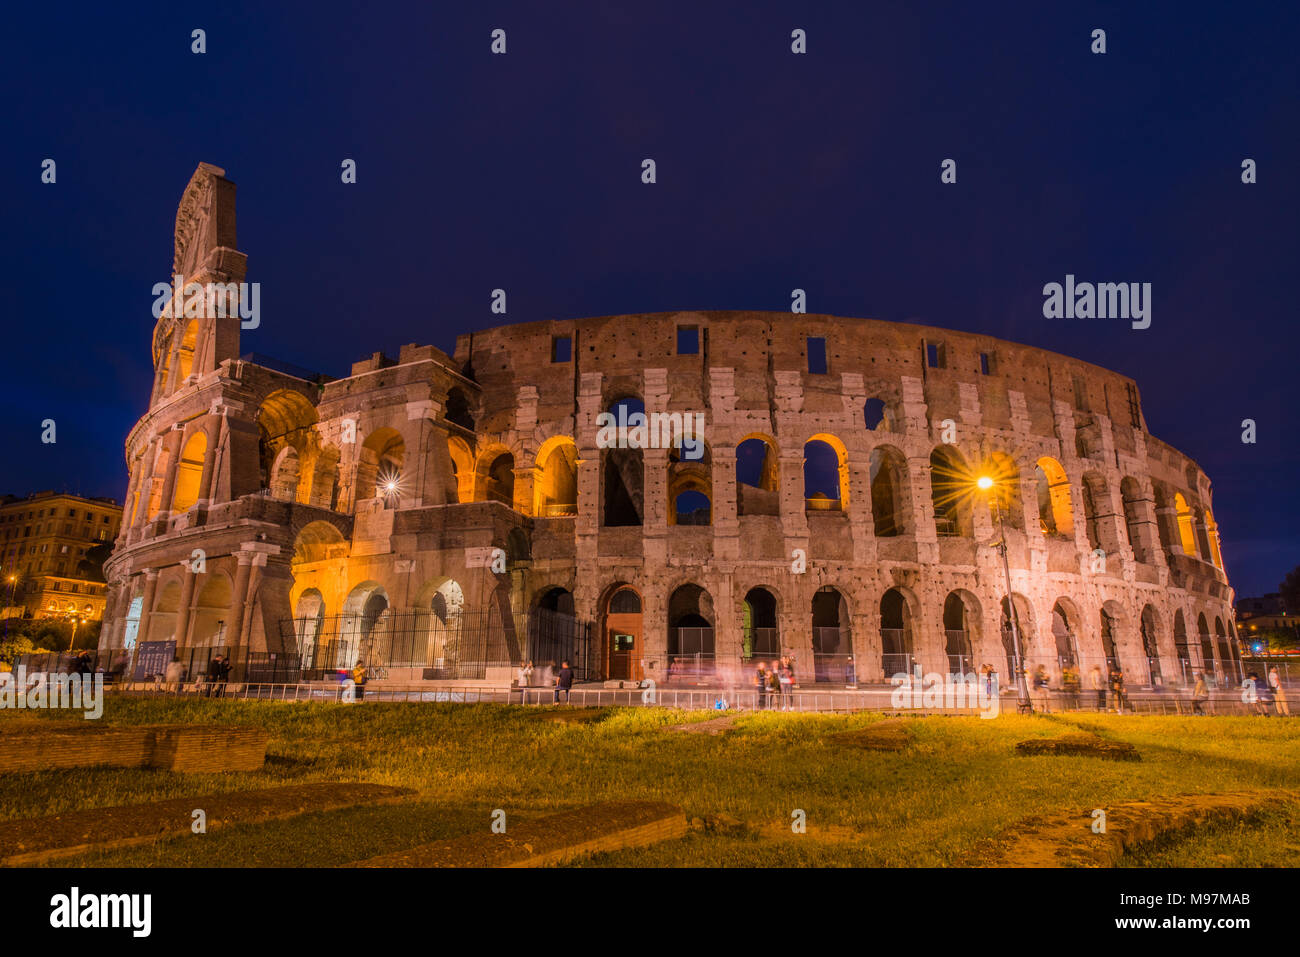 Evening shot of the Colloseum in Rome during blue hour Stock Photo